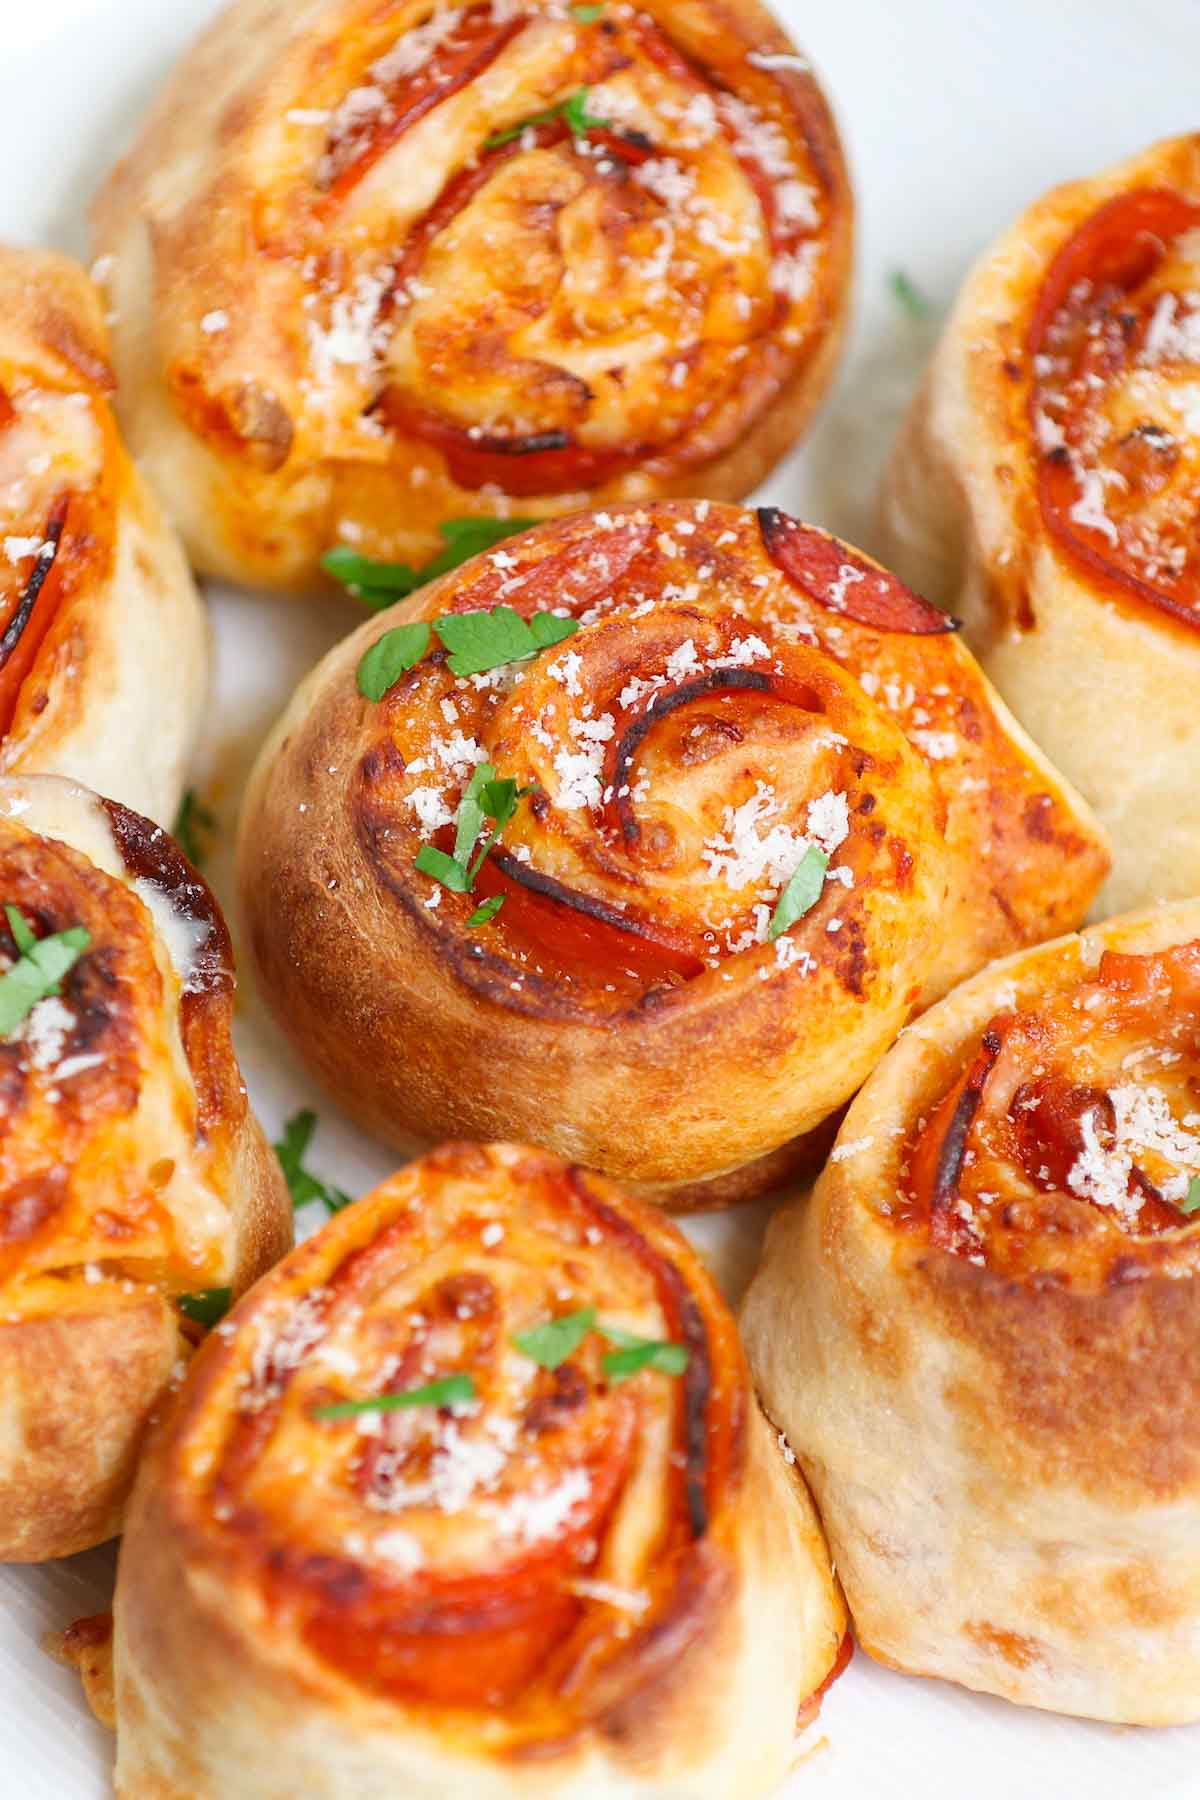 These Air Fryer Pizza Rolls have delicious pepperoni and mozzarella cheese packed in pizza pockets – an instant crowd-pleaser great for appetizer or snack. You can easily make these bite-sized mini pizzas at home from scratch in under 10 minutes. We’ve also included instructions on how to air fry frozen pizza puffs straight from the freezer. 